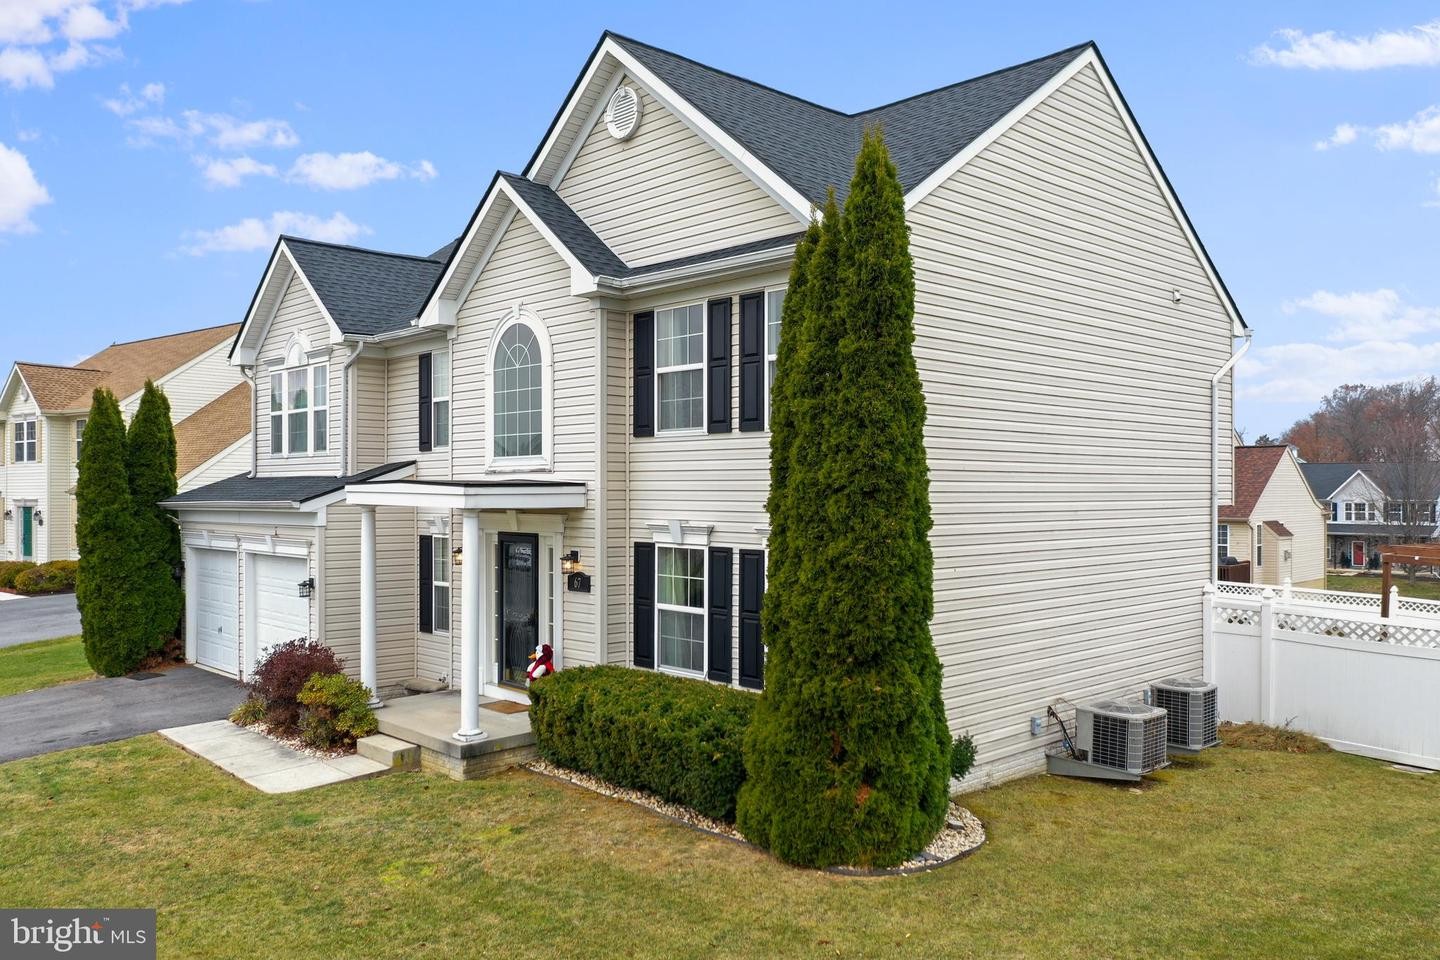 51. 67 Bridle Hill Ct